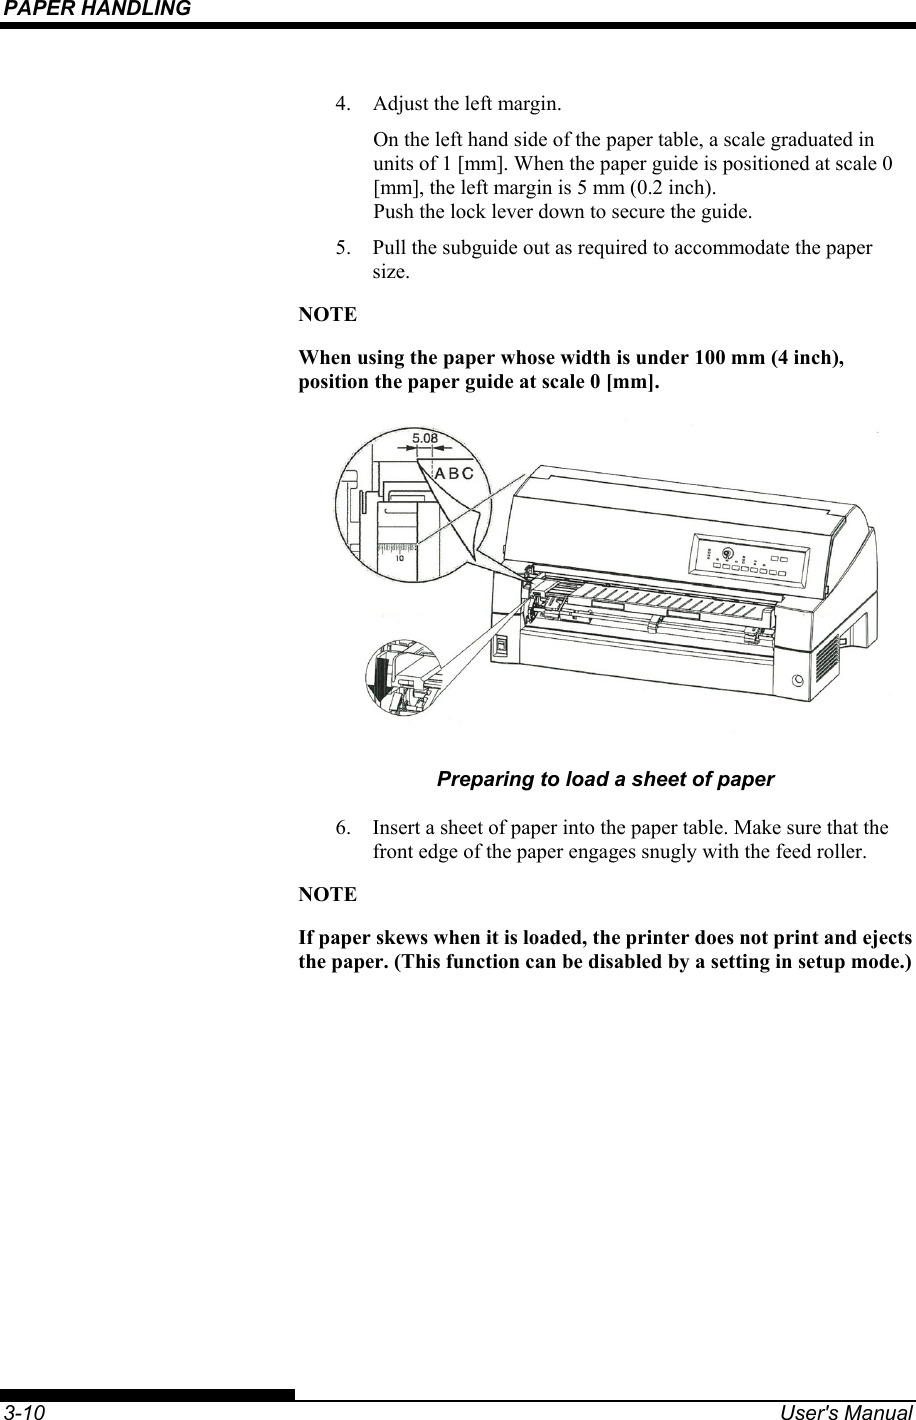 PAPER HANDLING    3-10  User&apos;s Manual 4.  Adjust the left margin. On the left hand side of the paper table, a scale graduated in units of 1 [mm]. When the paper guide is positioned at scale 0 [mm], the left margin is 5 mm (0.2 inch).  Push the lock lever down to secure the guide. 5.  Pull the subguide out as required to accommodate the paper size. NOTE When using the paper whose width is under 100 mm (4 inch), position the paper guide at scale 0 [mm].  Preparing to load a sheet of paper 6.  Insert a sheet of paper into the paper table. Make sure that the front edge of the paper engages snugly with the feed roller. NOTE If paper skews when it is loaded, the printer does not print and ejects the paper. (This function can be disabled by a setting in setup mode.) 